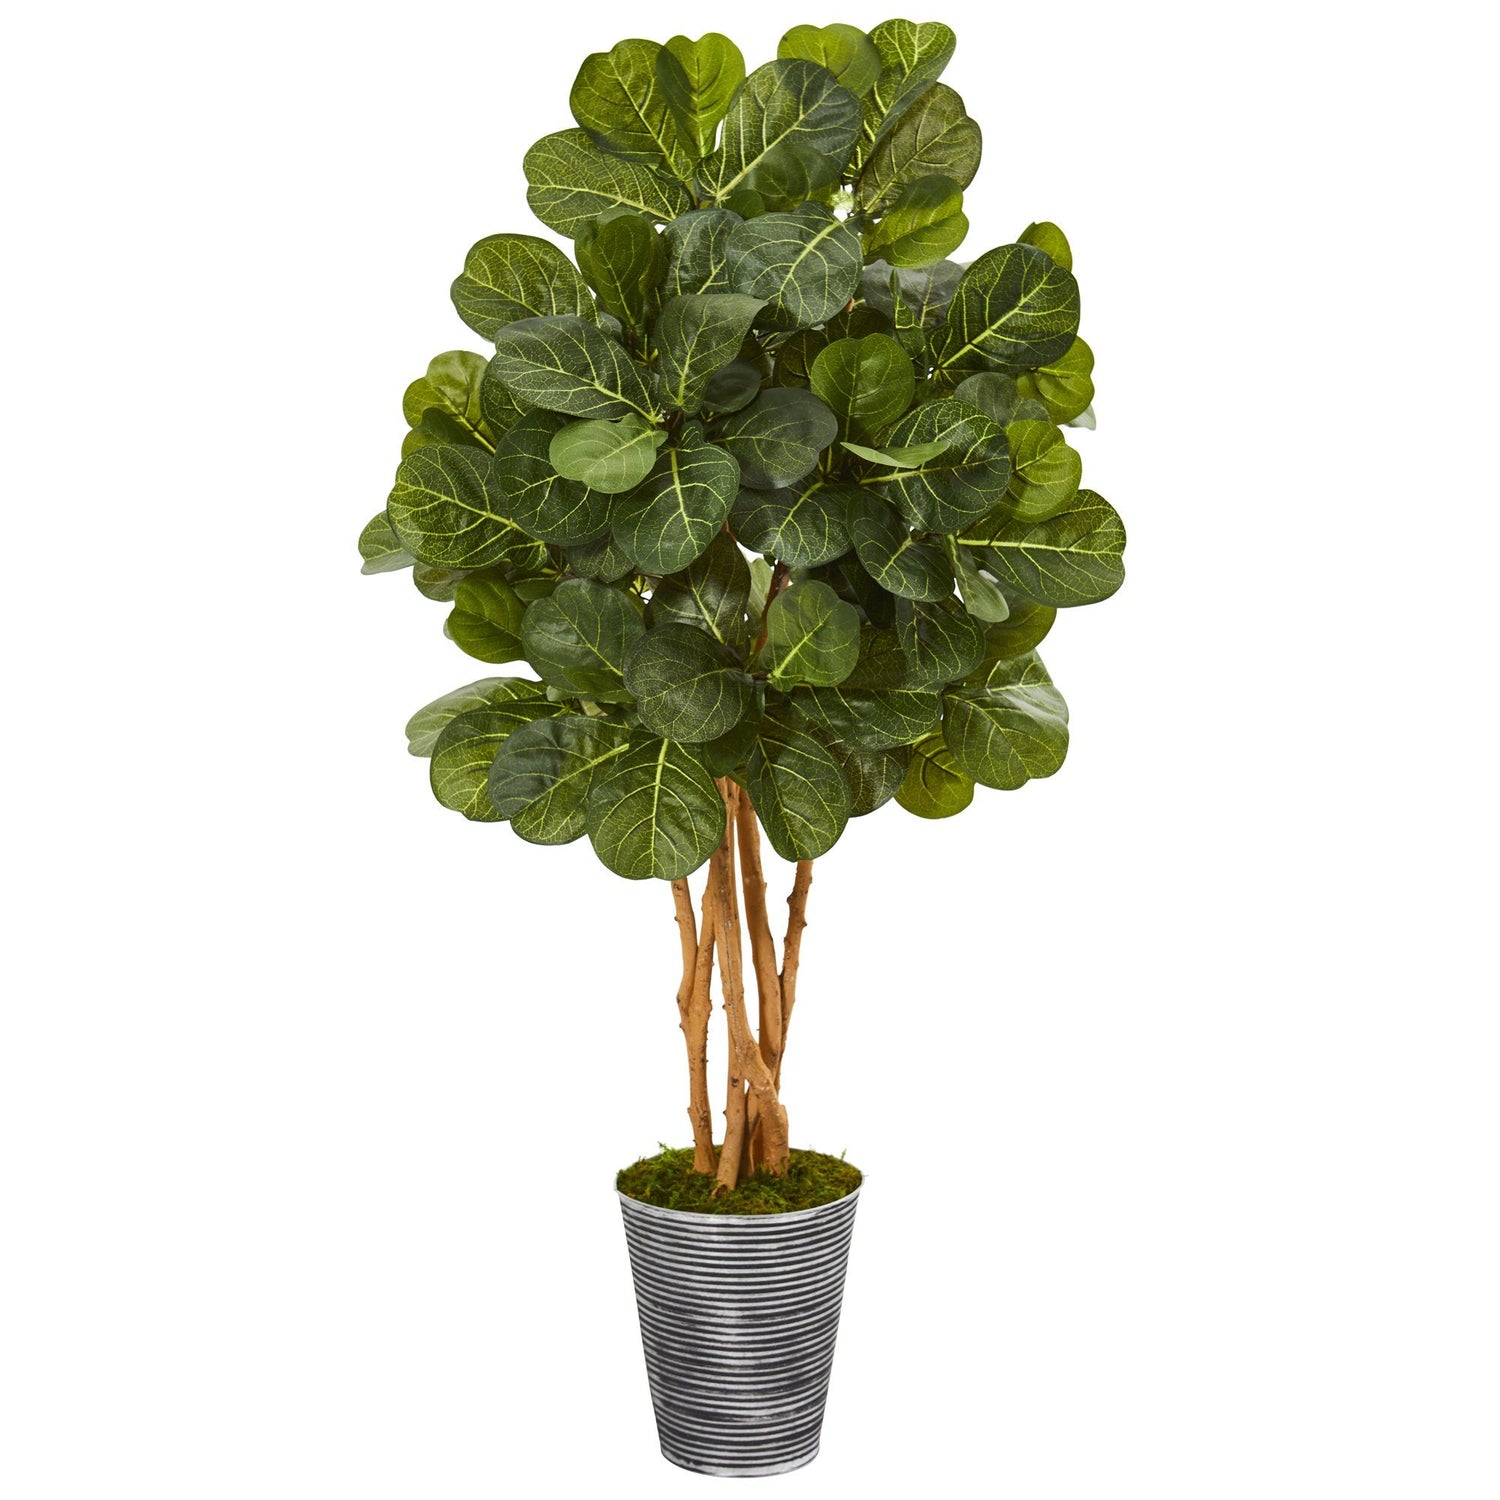 55” Fiddle Leaf Fig Artificial Tree in Decorative Tin Planter